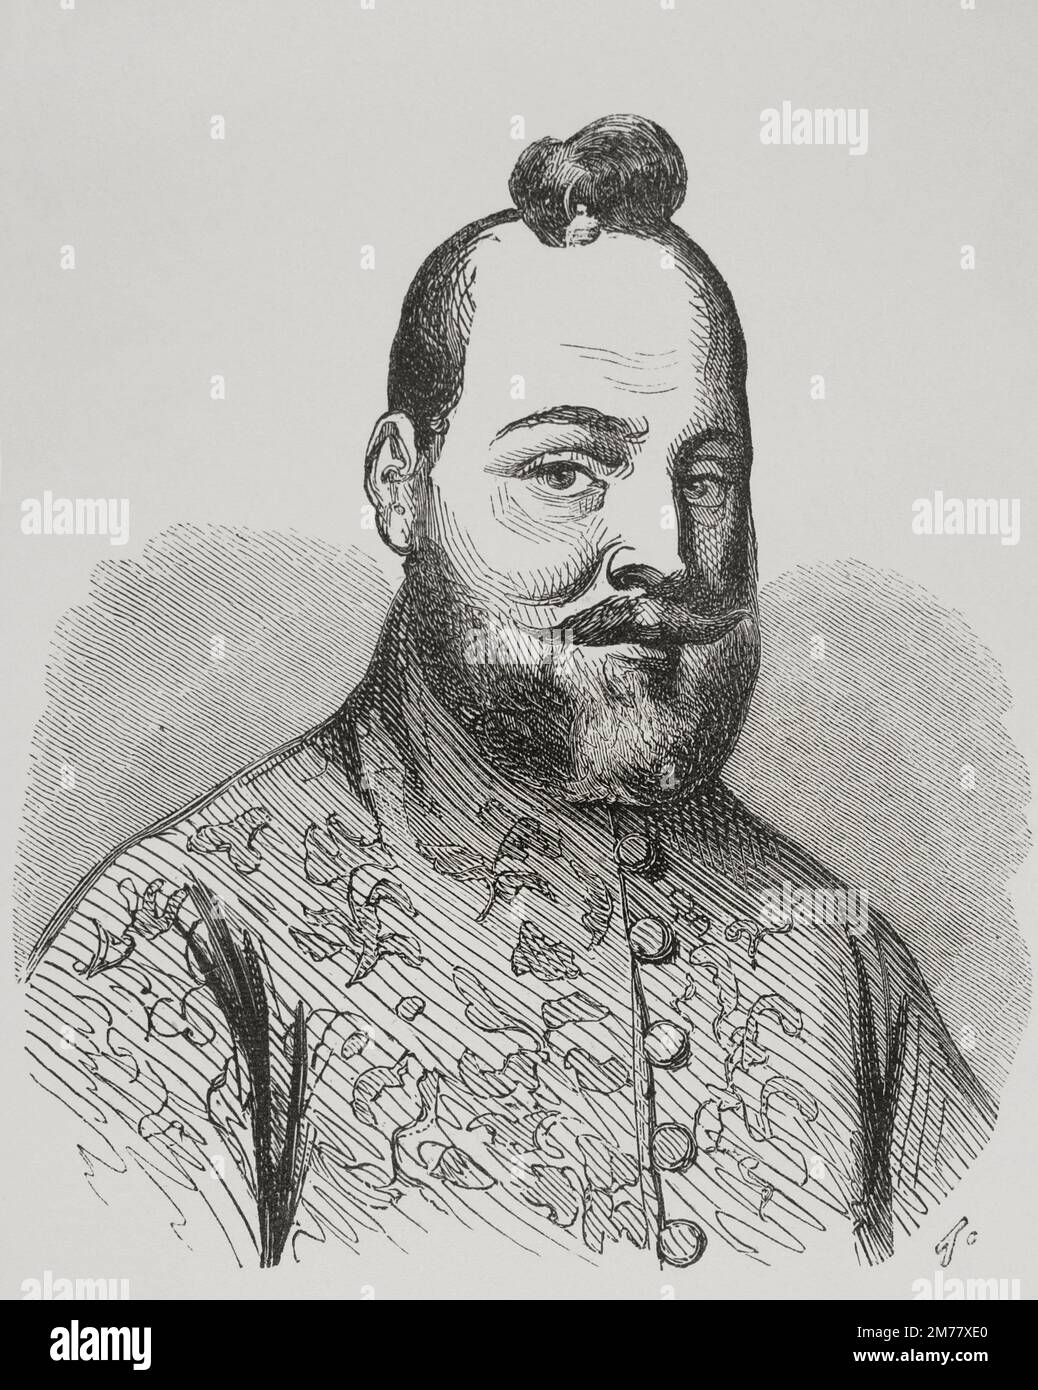 Ferenc Wesselenyi (1605-1667). Hungarian military commander and Palatine of the Royal Hungary. Portrait. Engraving. 'Los Heroes y las Grandezas de la Tierra' (The Heroes and the Grandeurs of the Earth). Volume VI. 1856. Stock Photo